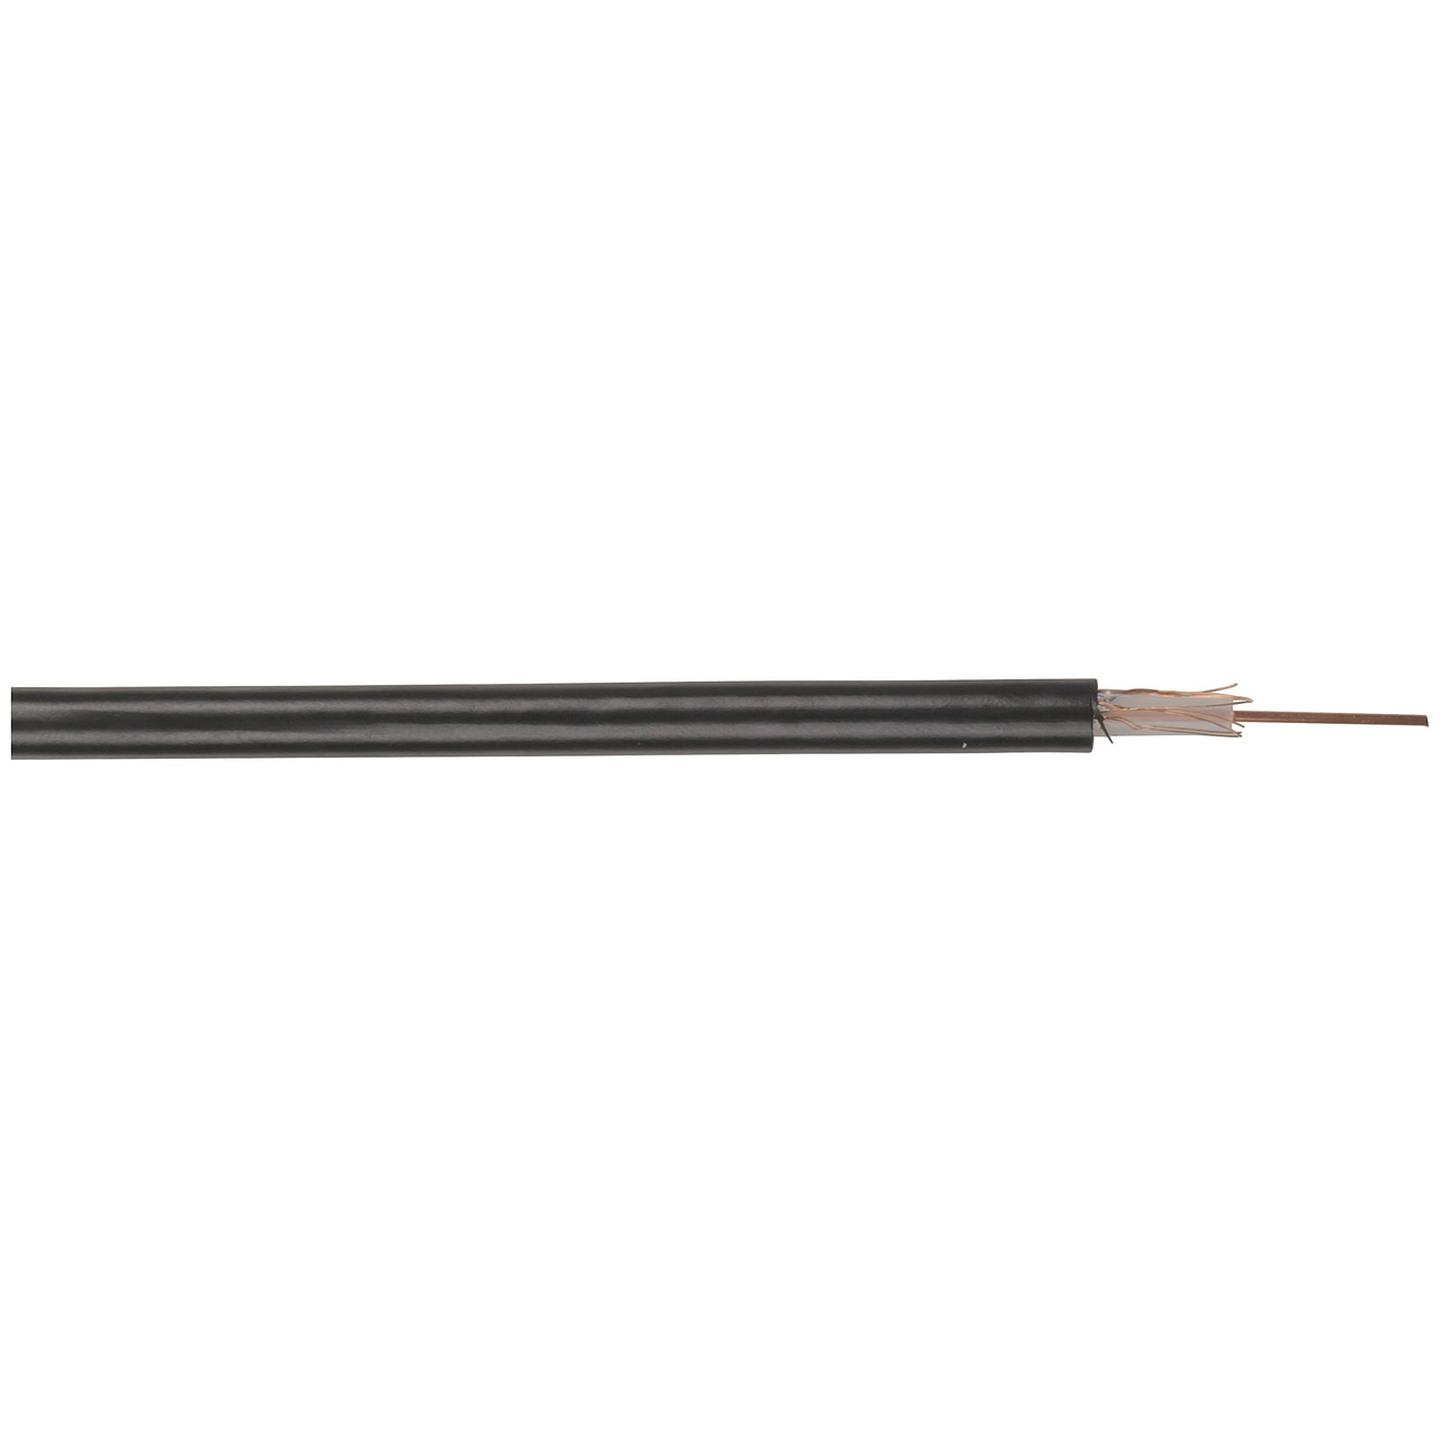 50 Ohm RG58U Coaxial Cable